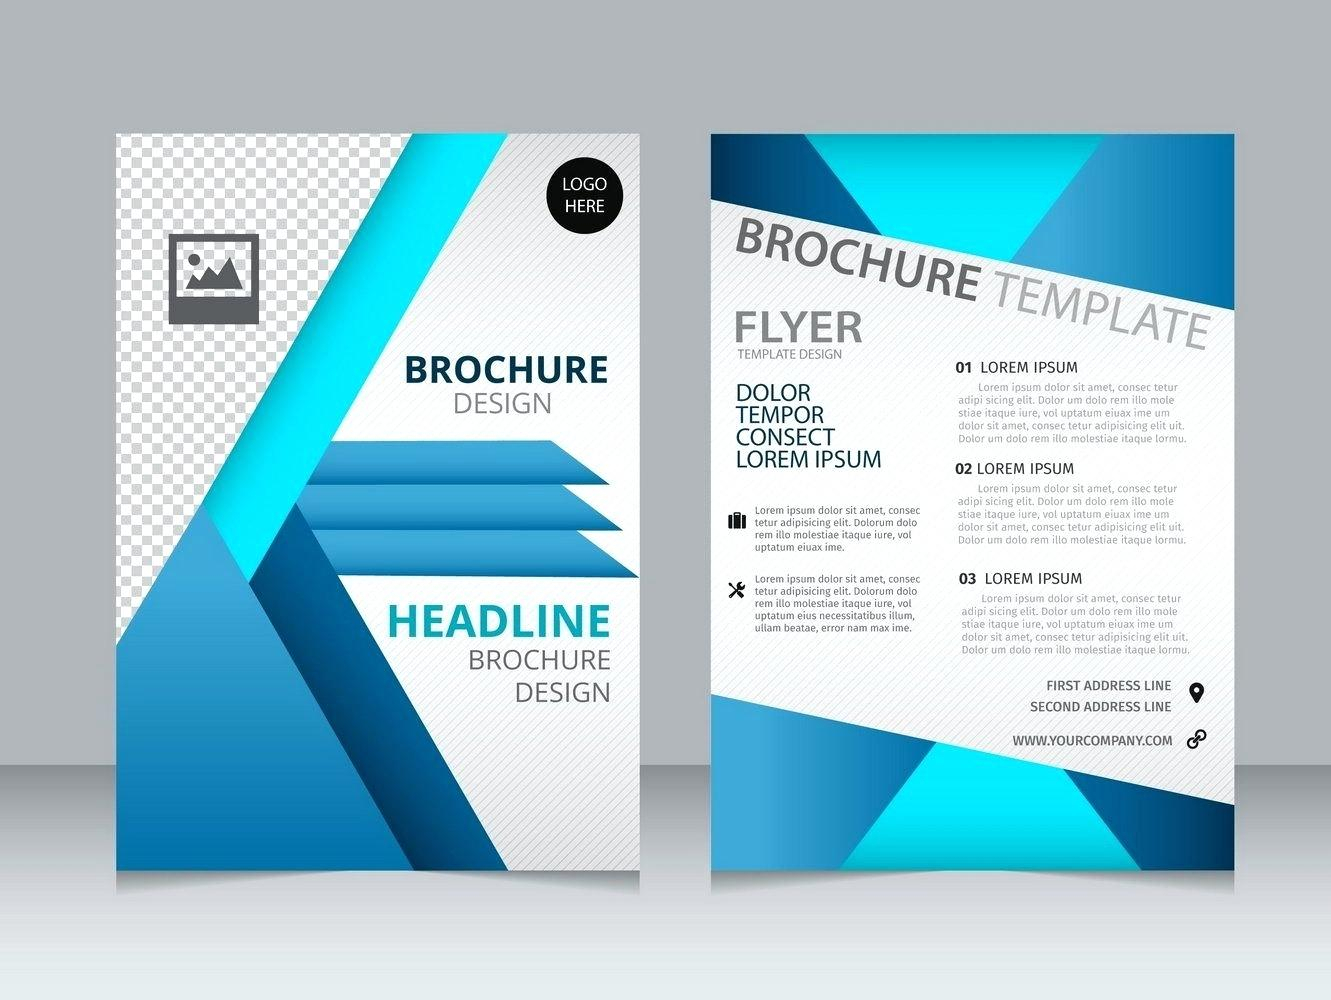 Free Brochure Template Downloads For Word Templates Inside Free Brochure Template Downloads